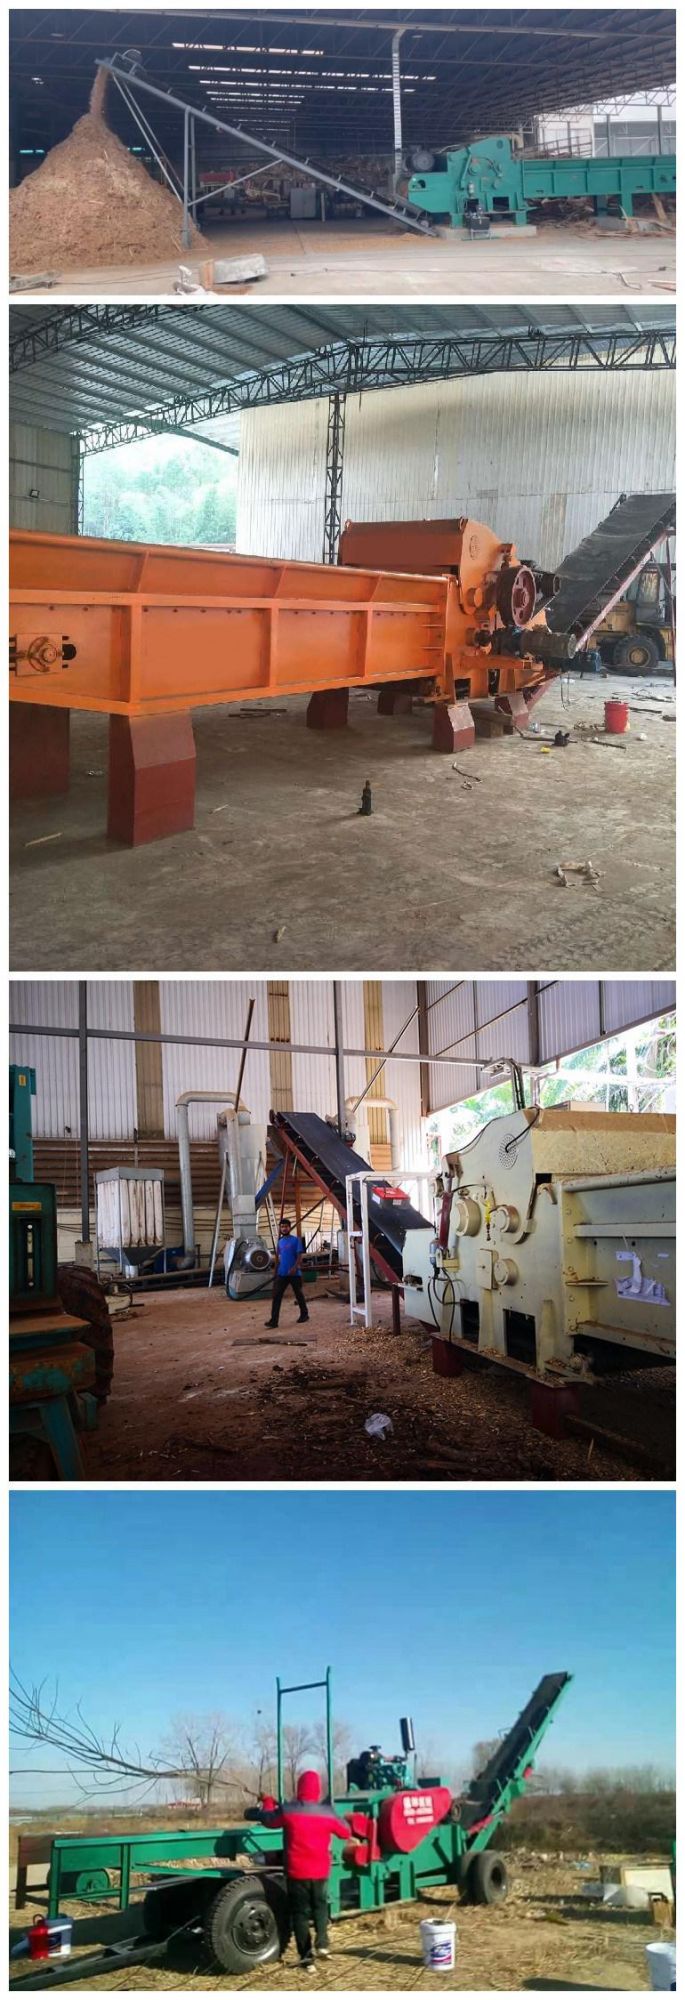 Easy to Operate Wood Chipper Machines Producing Sawdust